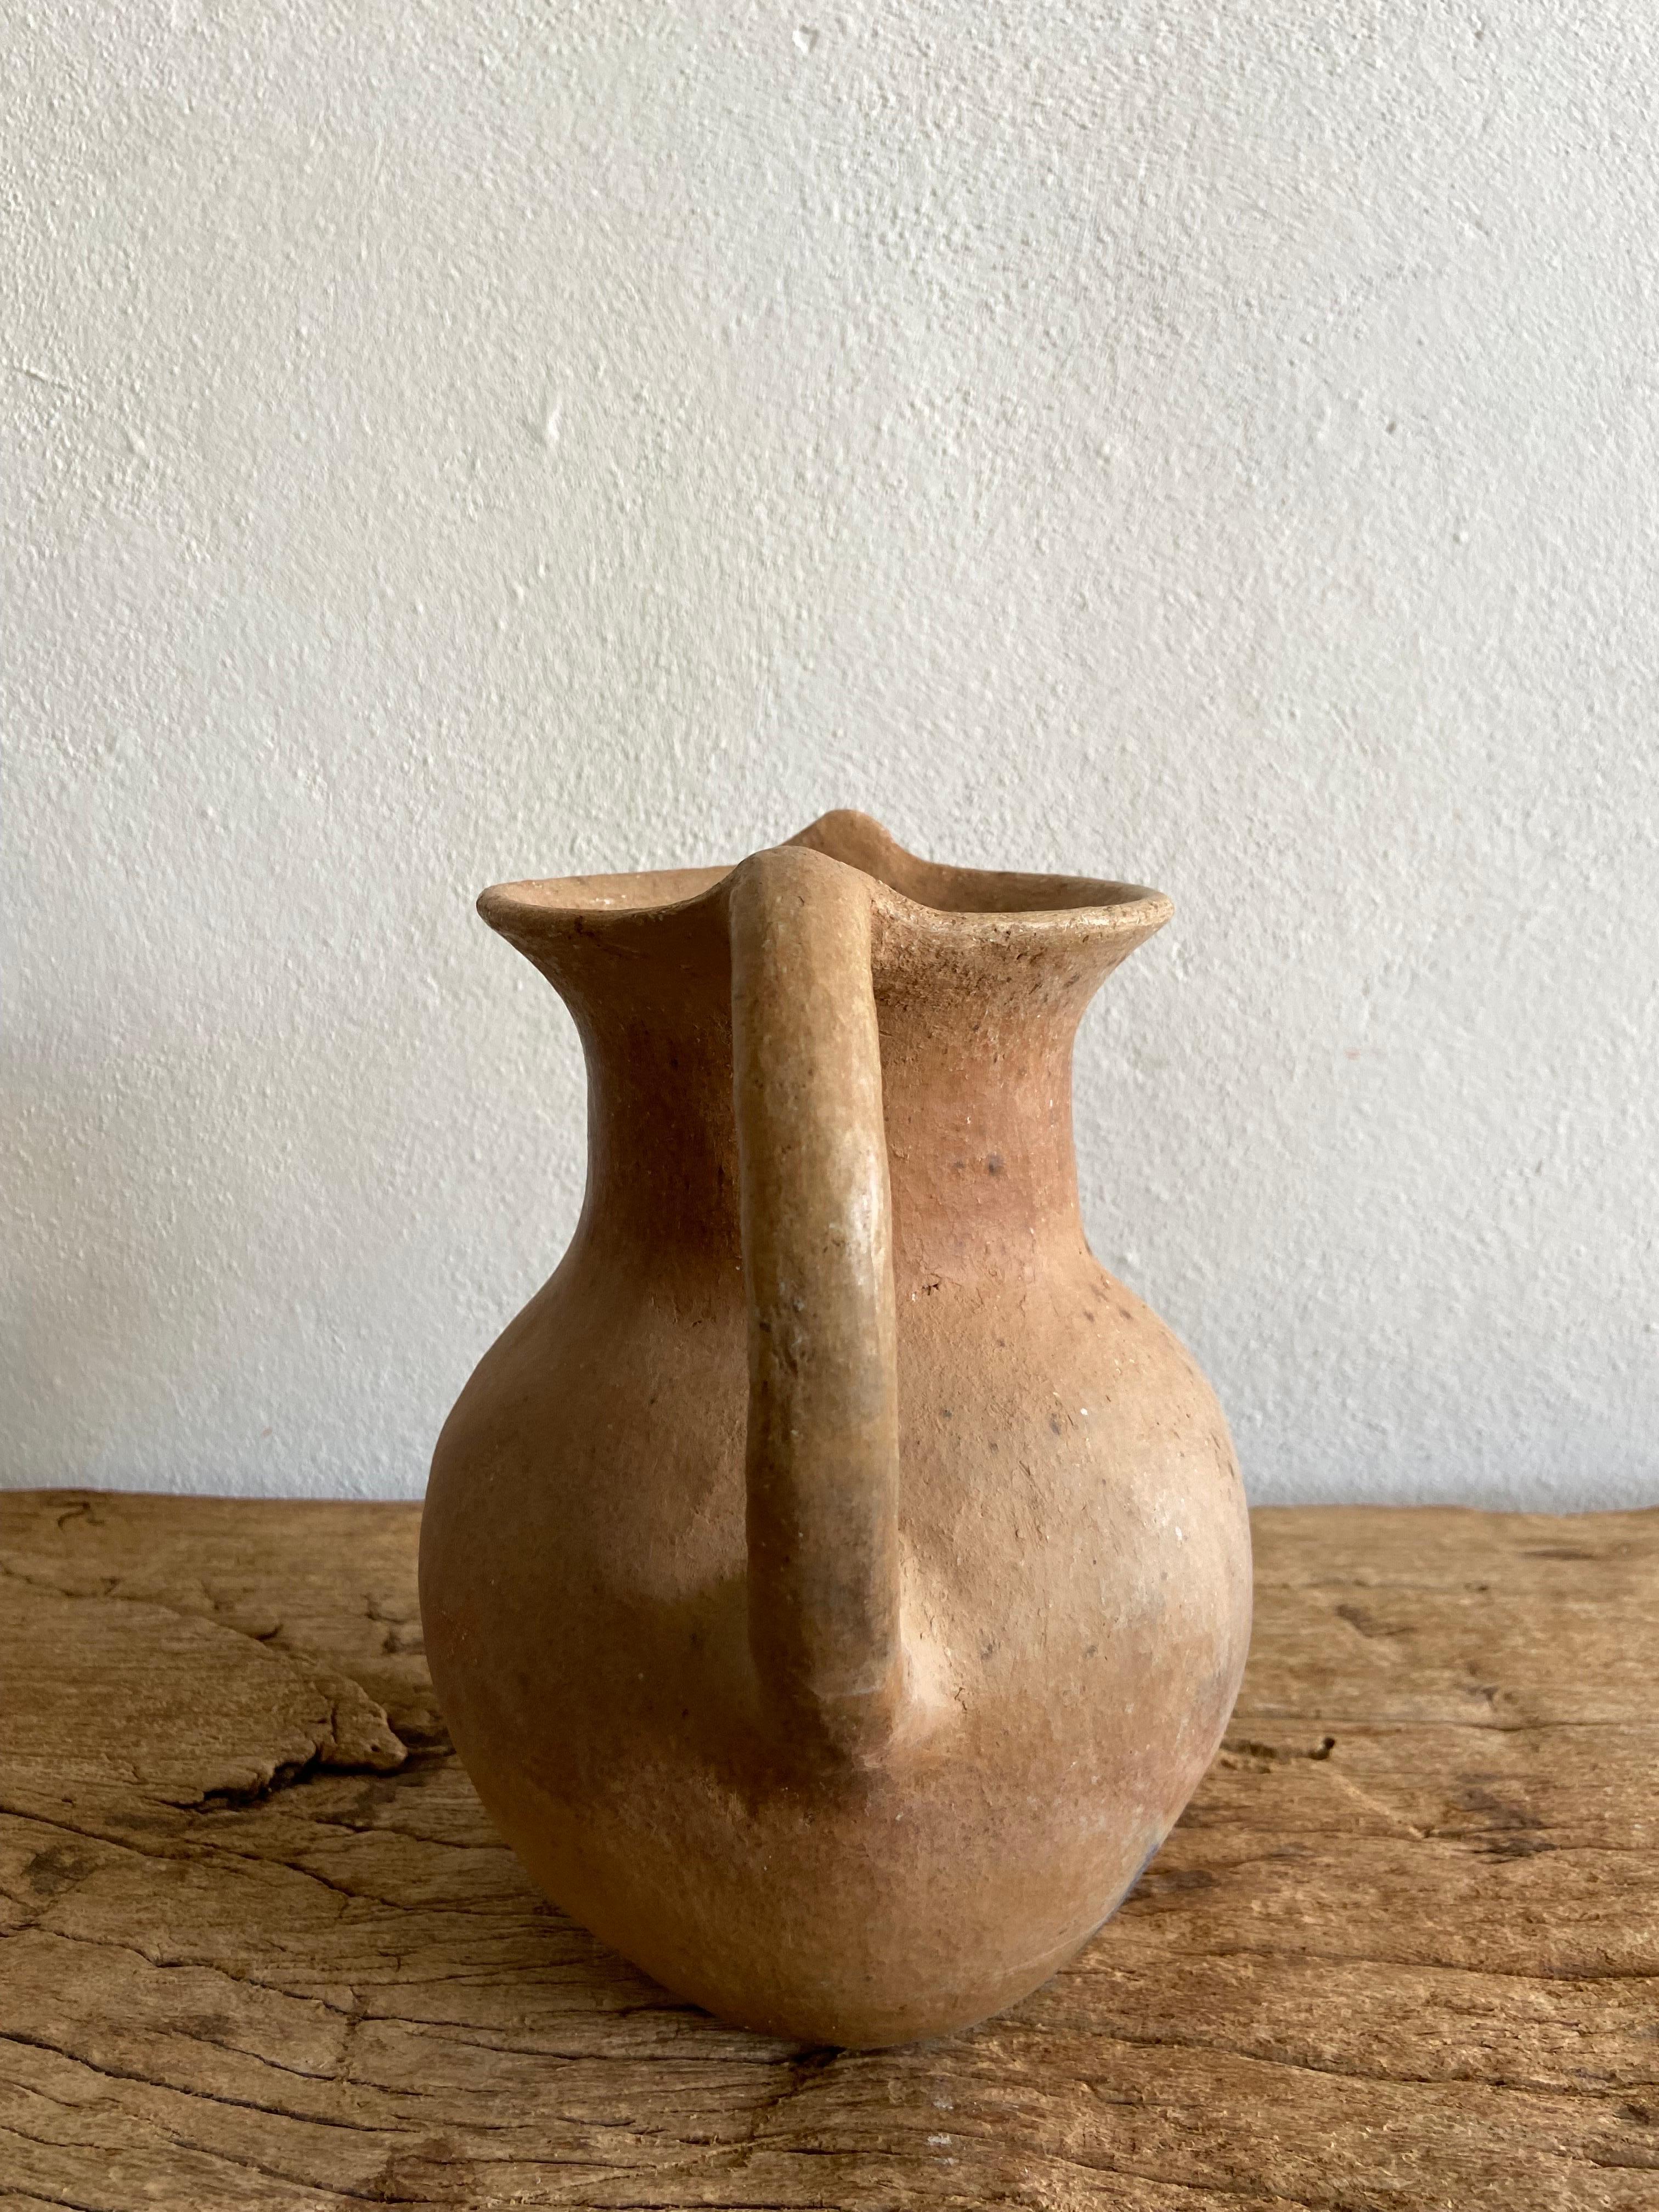 Hand-Crafted Double Handle Terracotta Vessel from Mexico, Circa Mid 20th Century